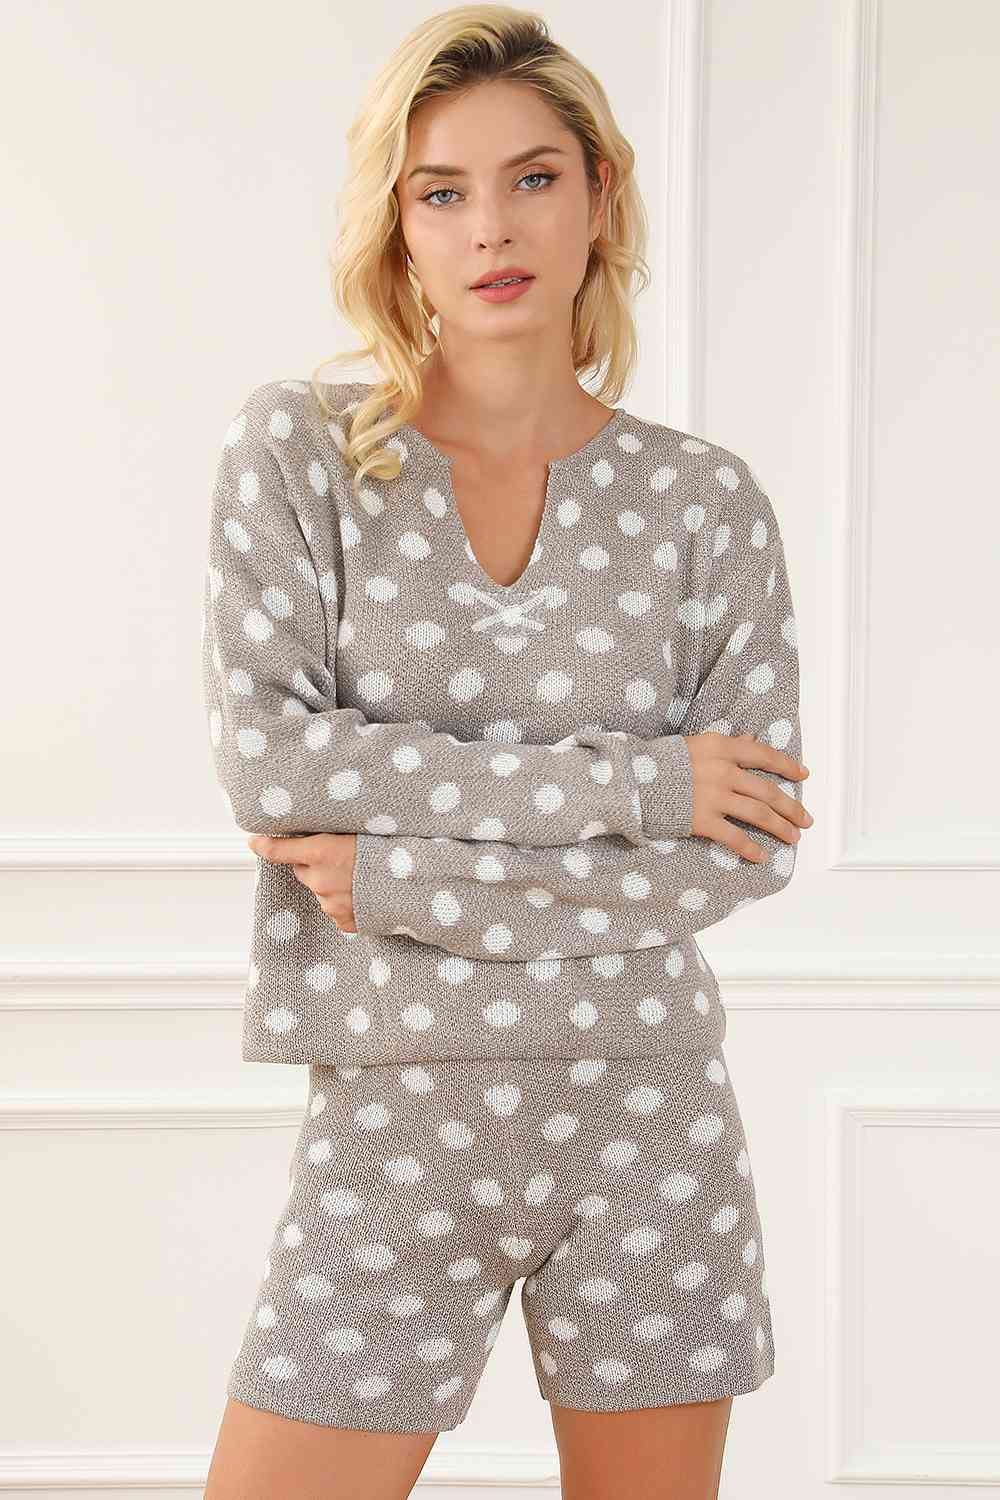 Polka Dot Notched Neck Top and Shorts Set - Fashion Girl Online Store